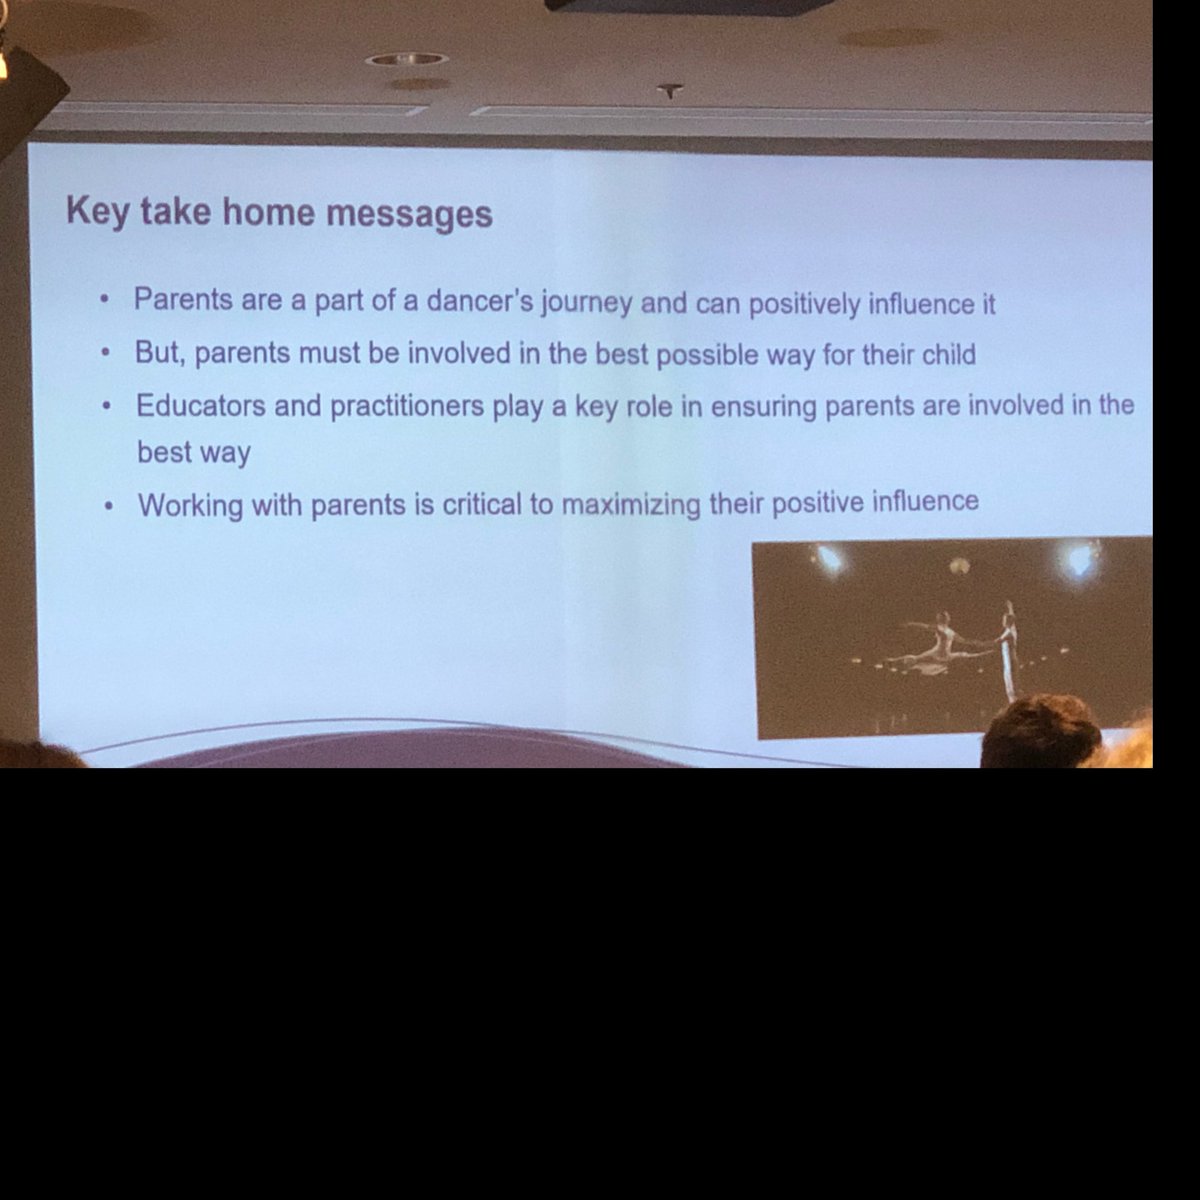 #IADMS2018 highlight so far @cjknight excellent session on supporting and enabling parents in dance to support and enable their childre. As a mum and an educator I feel reaffirmed, inspired and hopeful!!